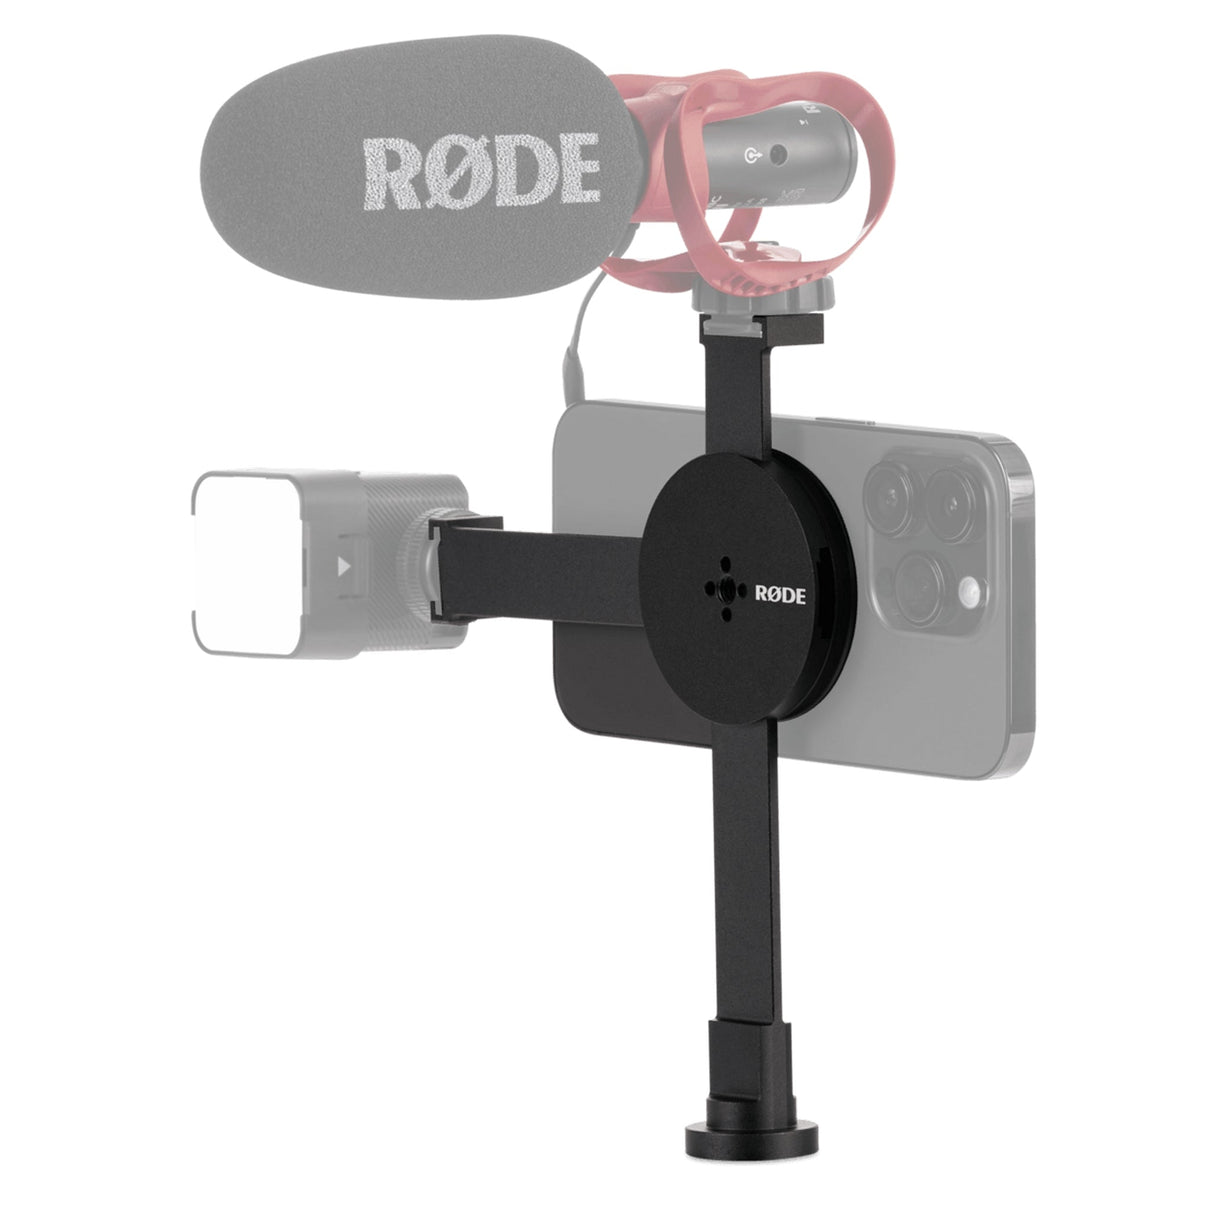 RODE Magnetic Mount for Mounting Accessories to MagSafe iPhone or Cases